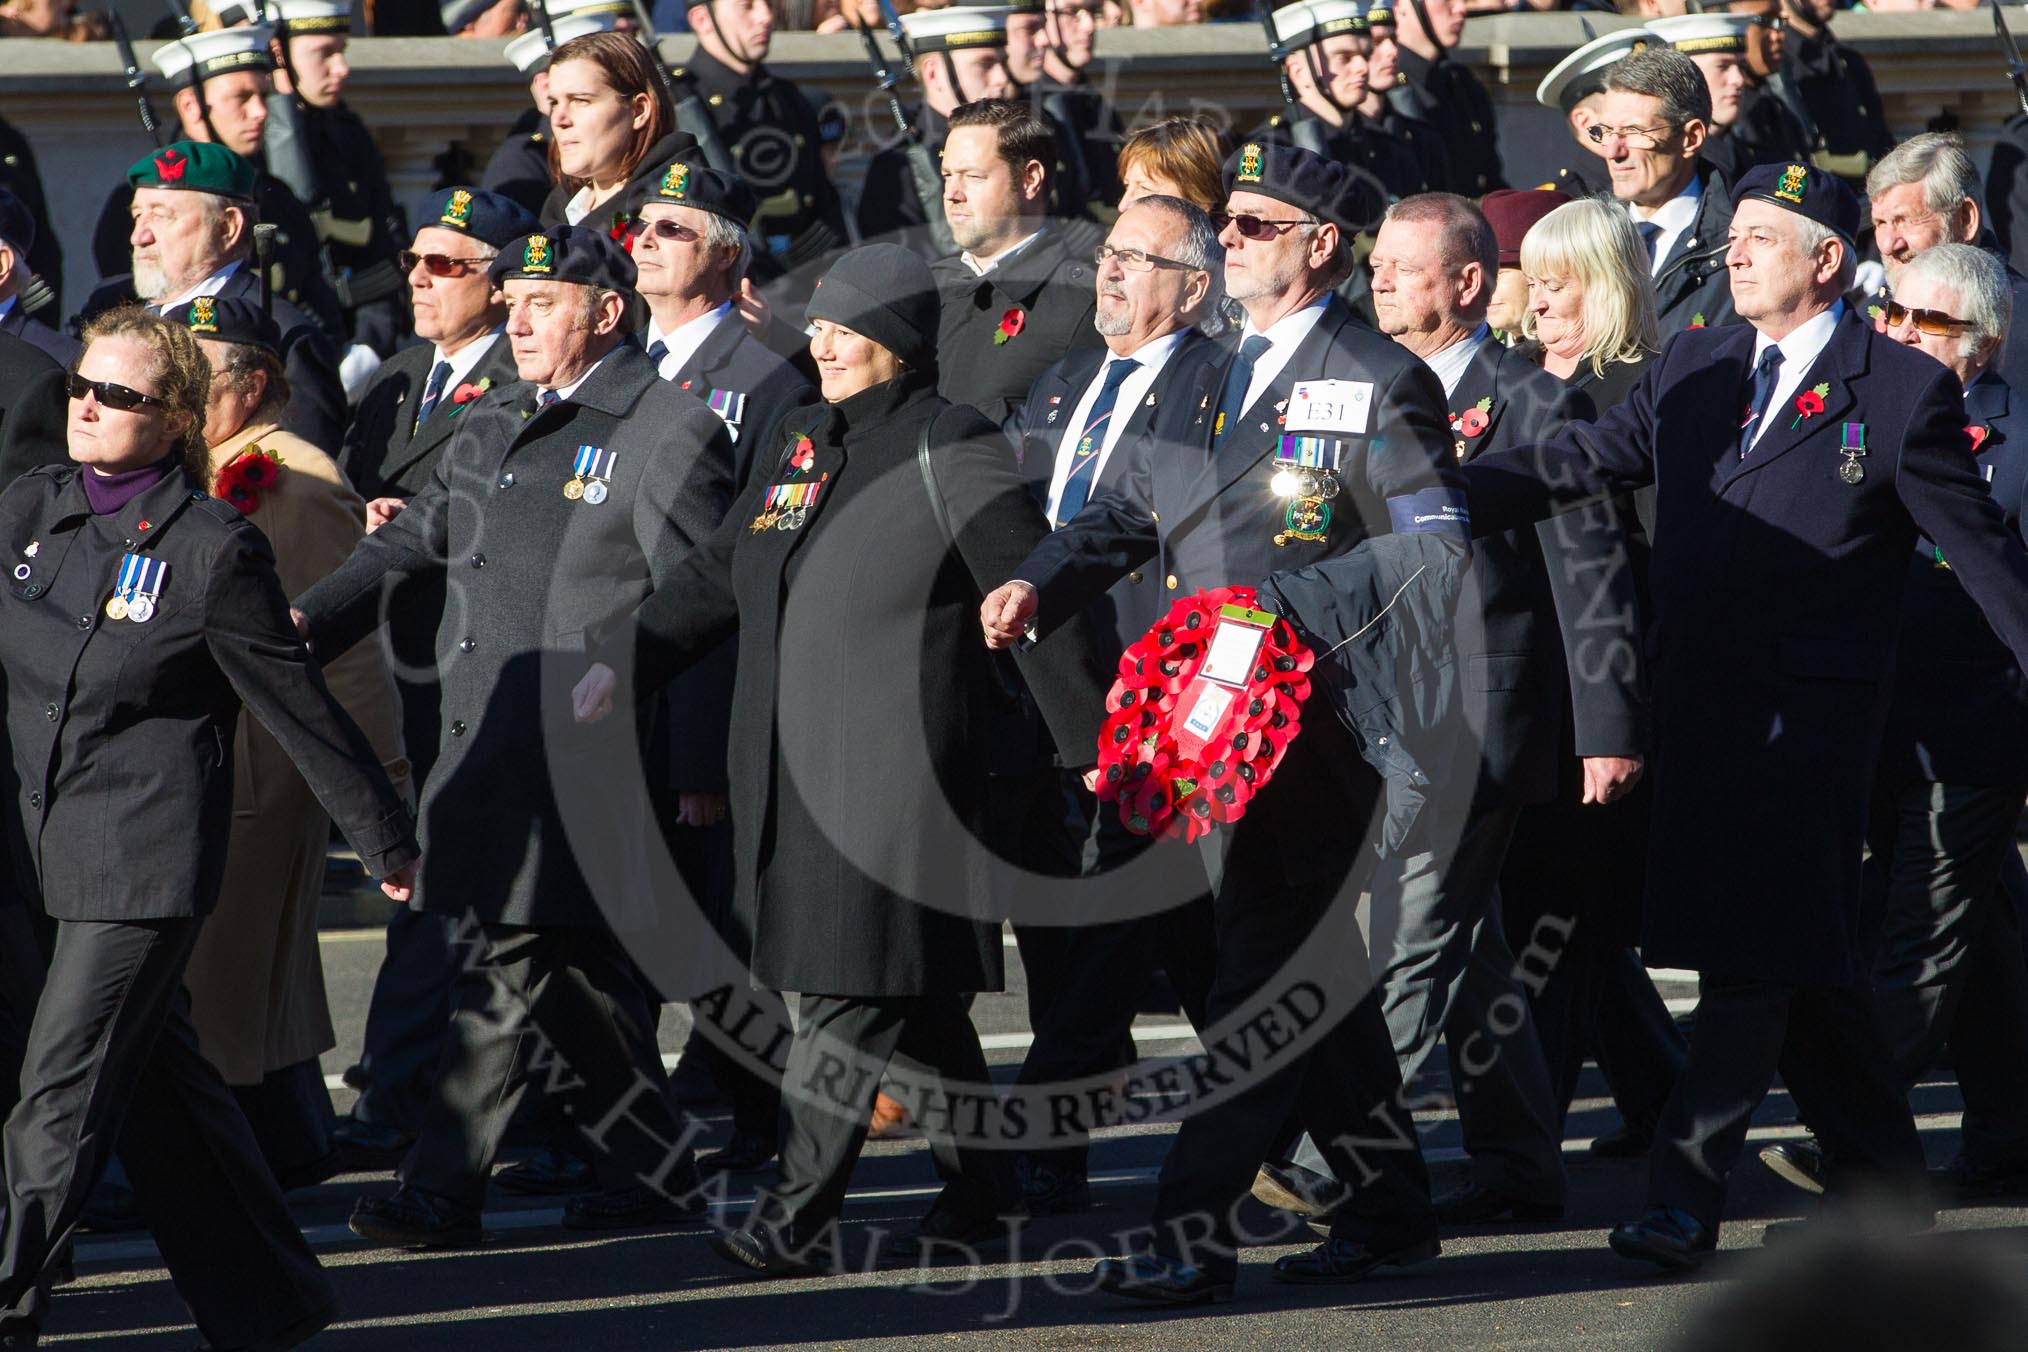 Remembrance Sunday 2012 Cenotaph March Past: Group E31 - Royal Naval Communications Association..
Whitehall, Cenotaph,
London SW1,

United Kingdom,
on 11 November 2012 at 11:41, image #224